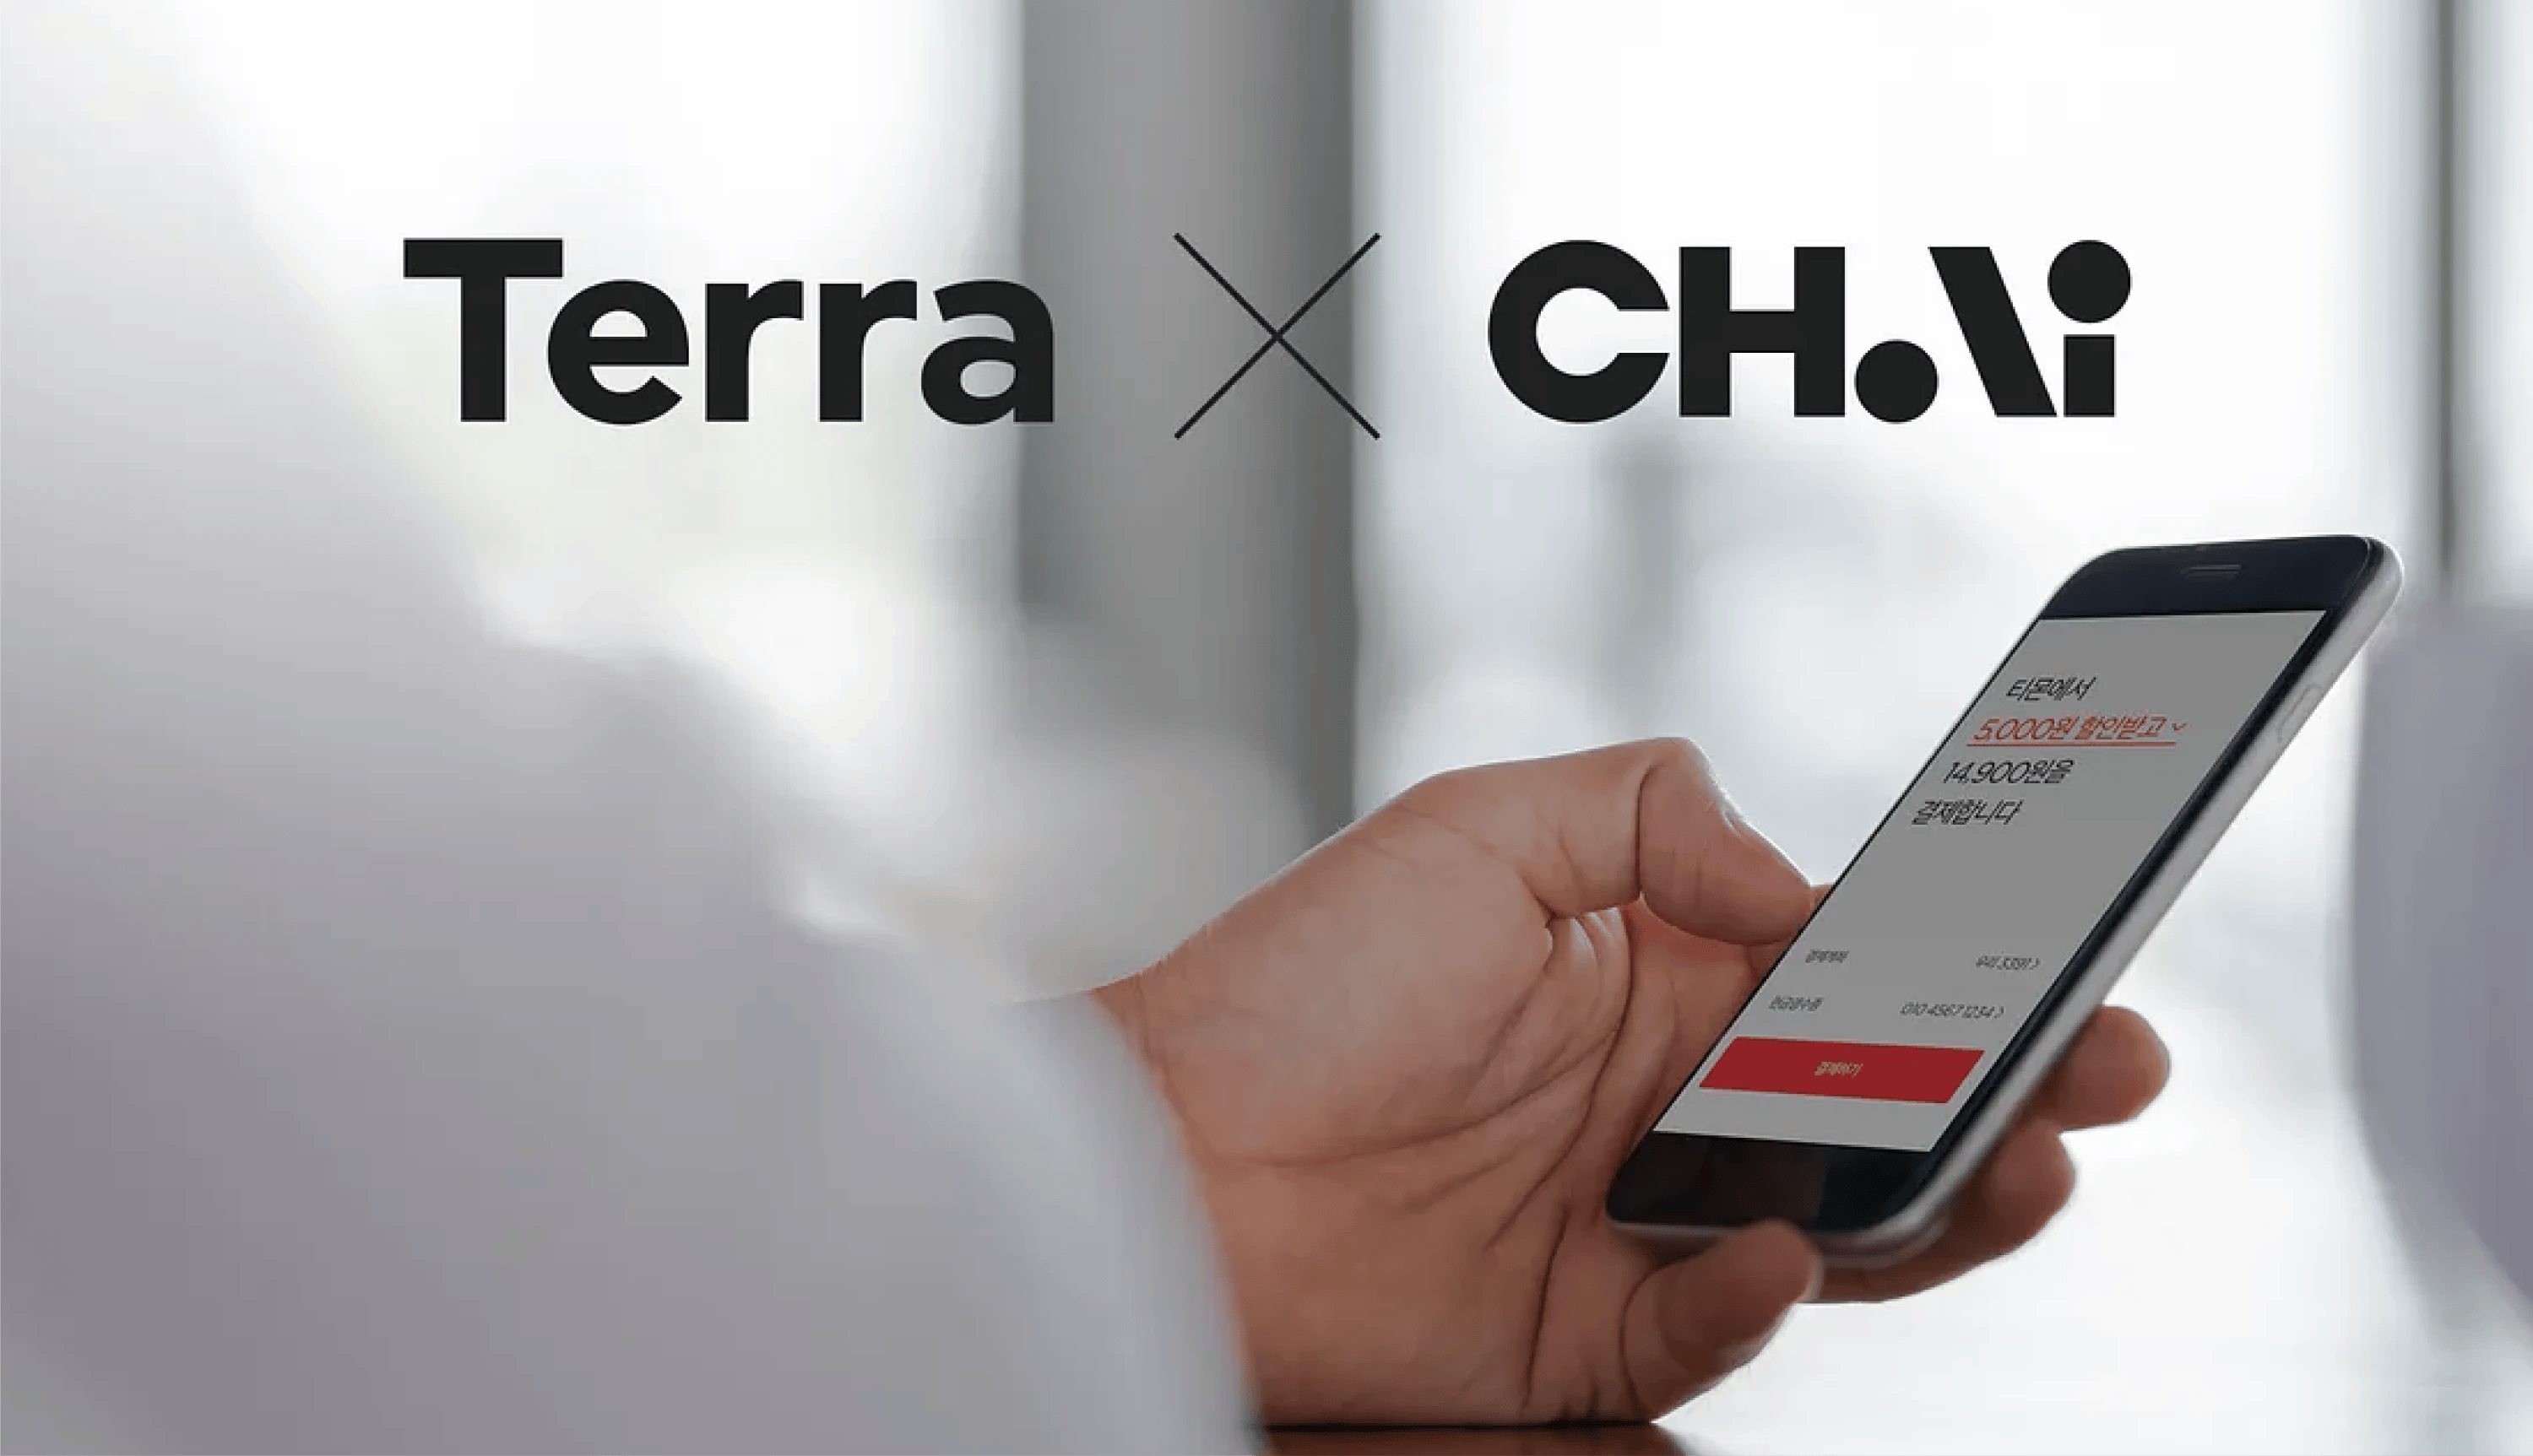 Chai Payments App in Terra Ecosystem Didn't Use Crypto